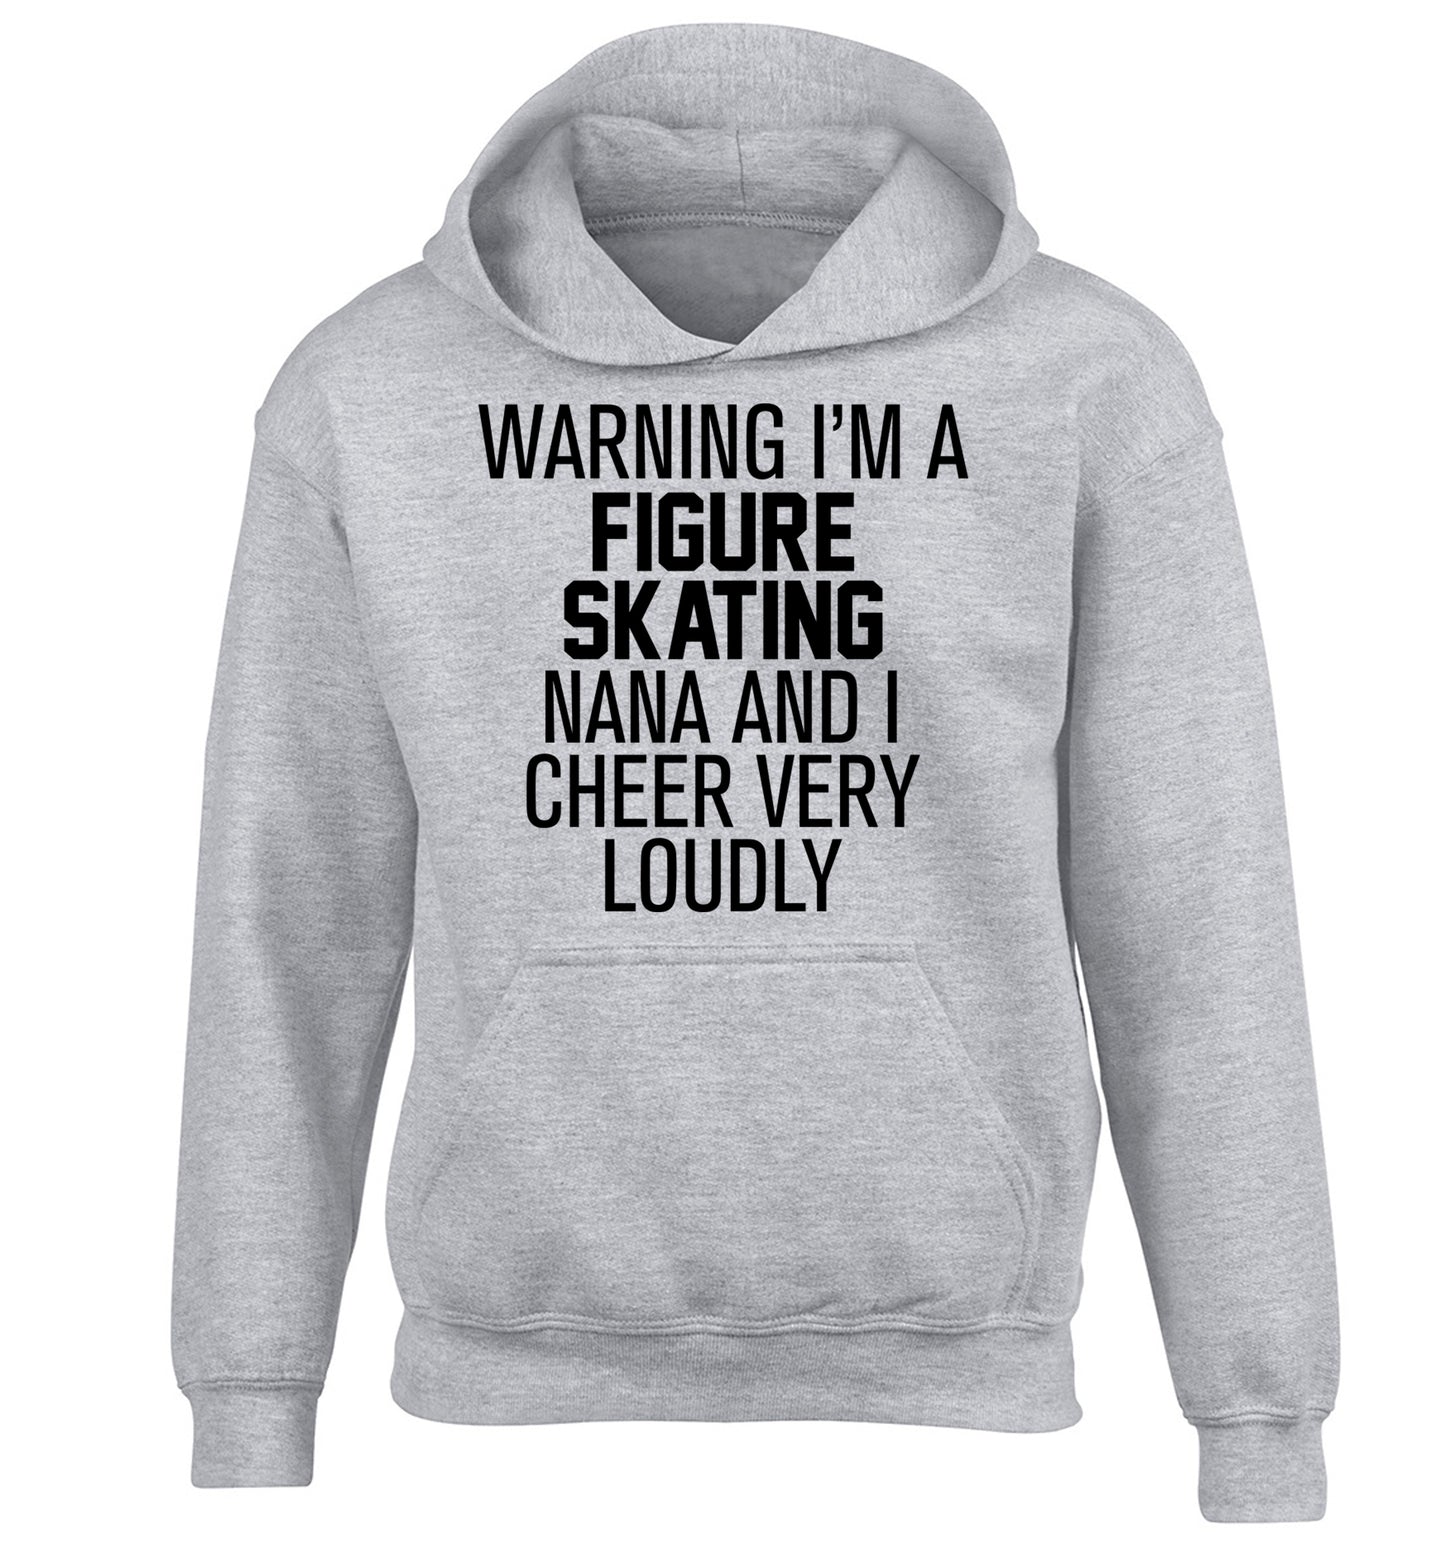 Warning I'm a figure skating nana and I cheer very loudly children's grey hoodie 12-14 Years